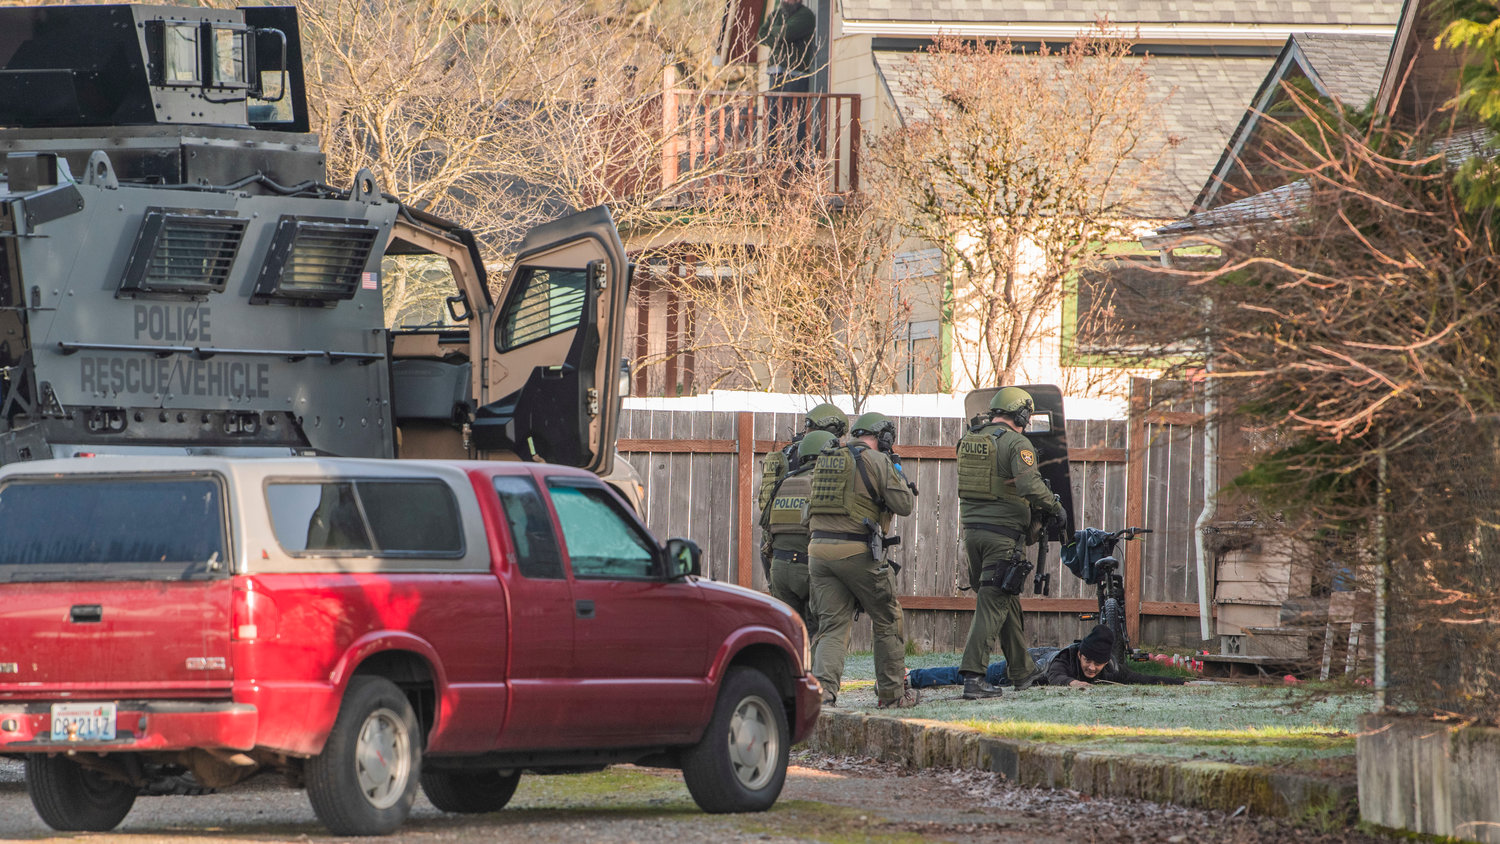 Law enforcement works to detain an individual in the 1300 block of Windsor Avenue in Centralia on Thursday.